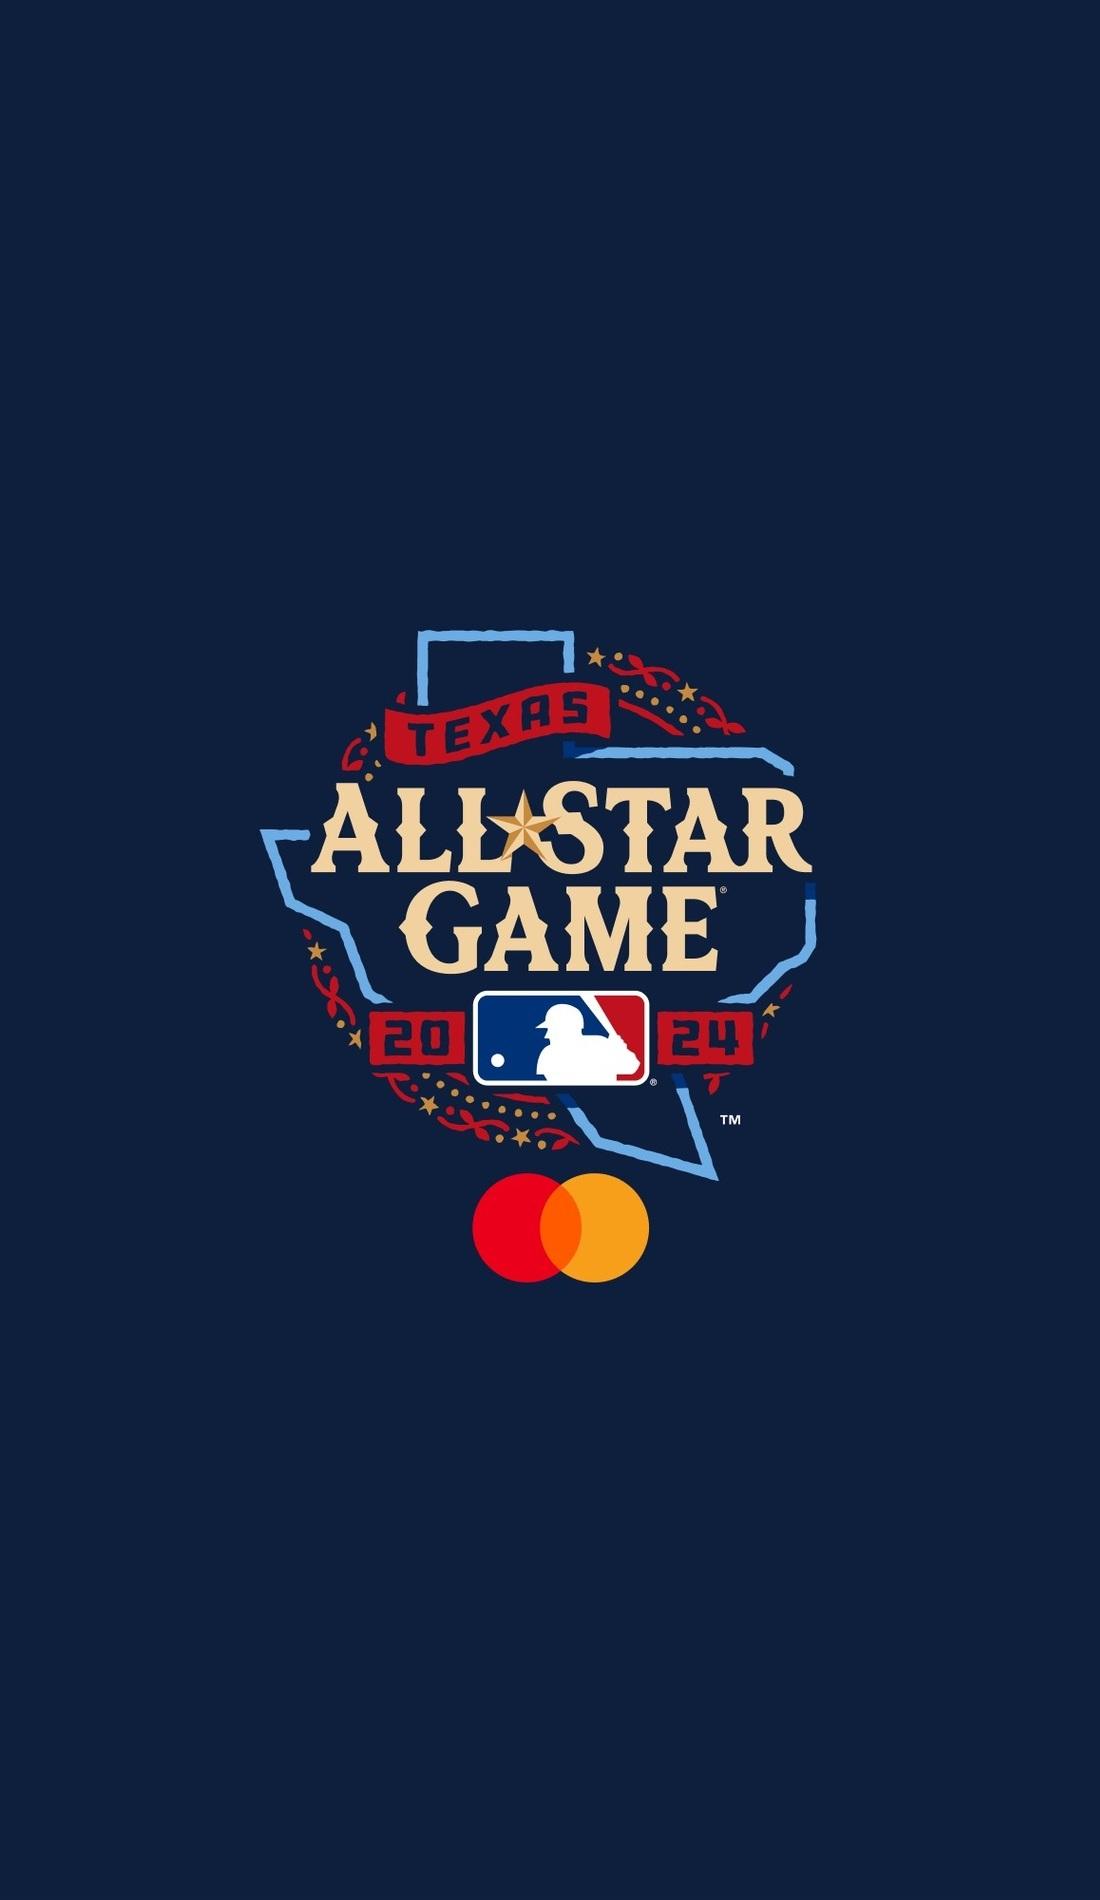 2019 MLB All-Star Game rosters: Full AL, NL teams for Cleveland event